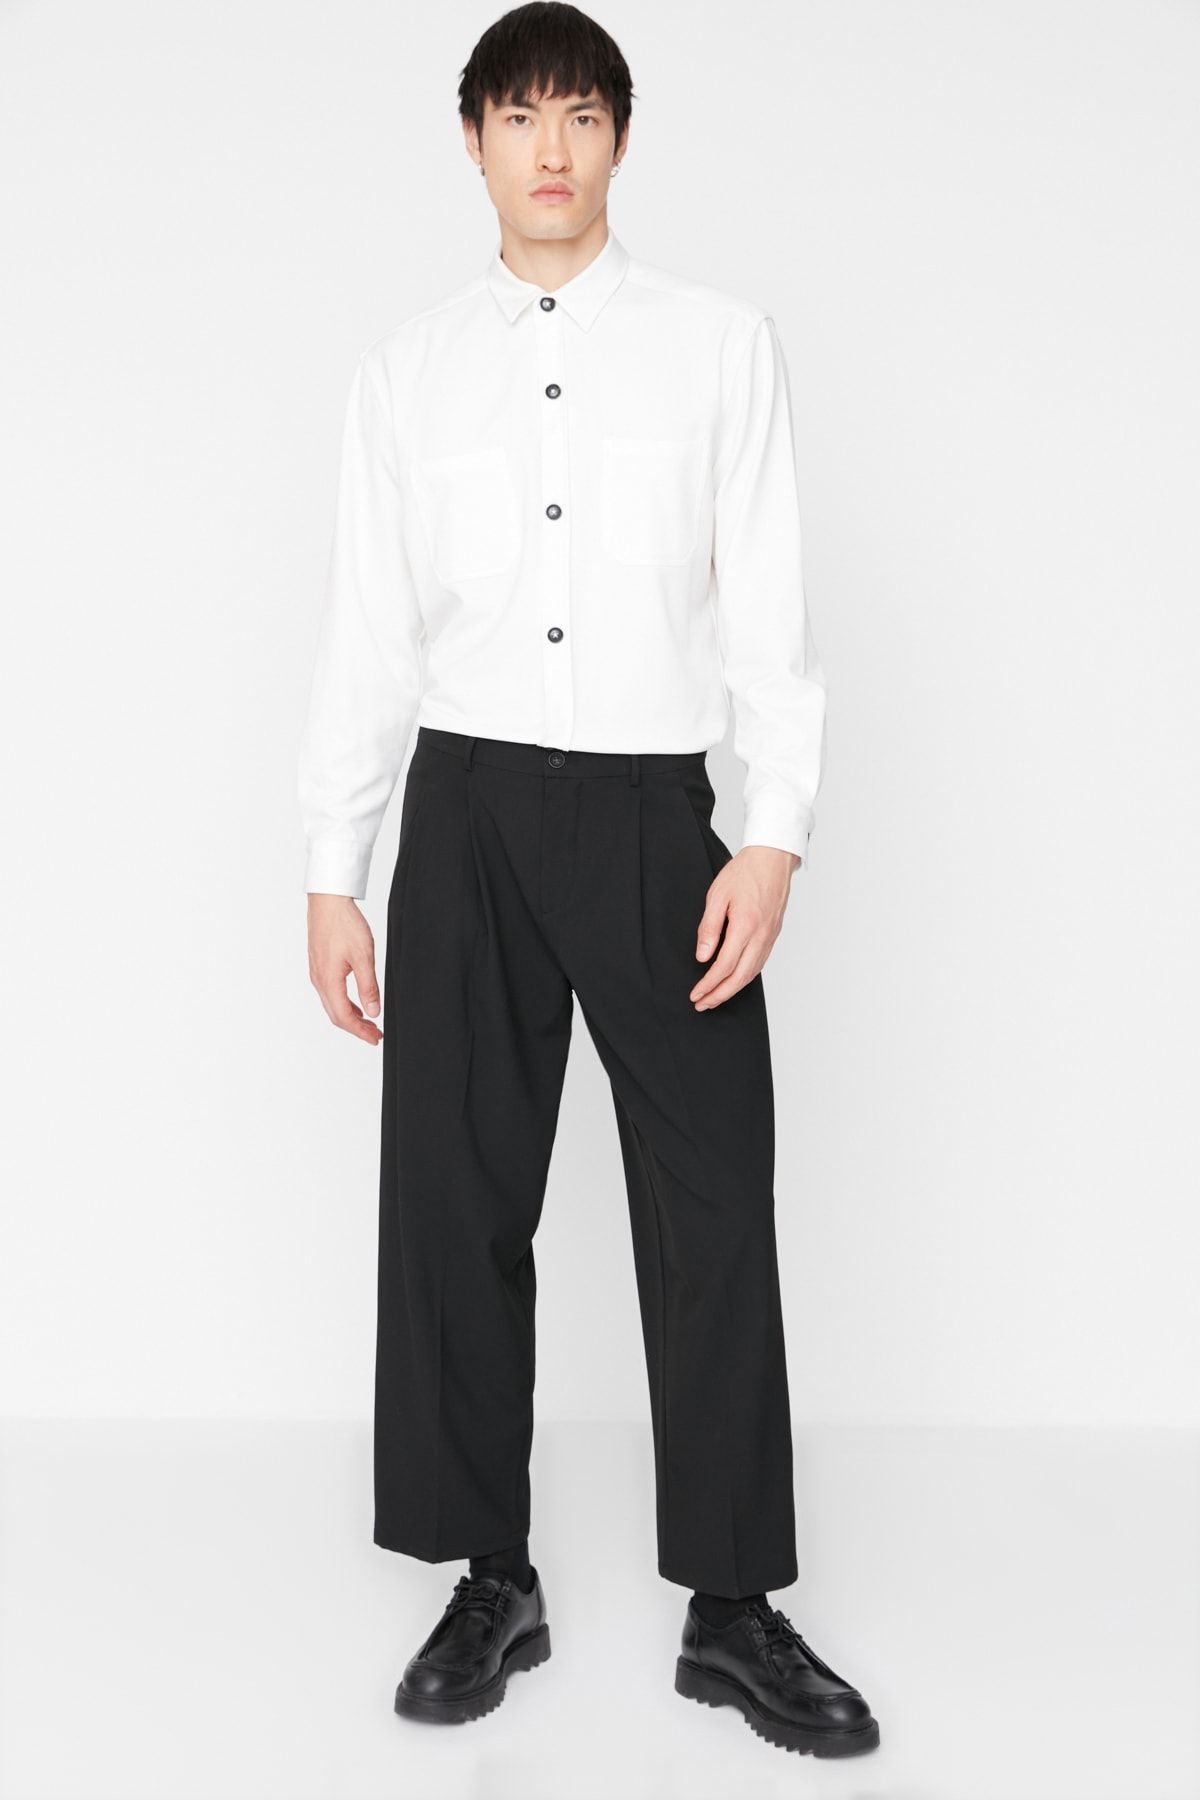 Buy Men's Black Pleat Less Formal Pants for Both Office and